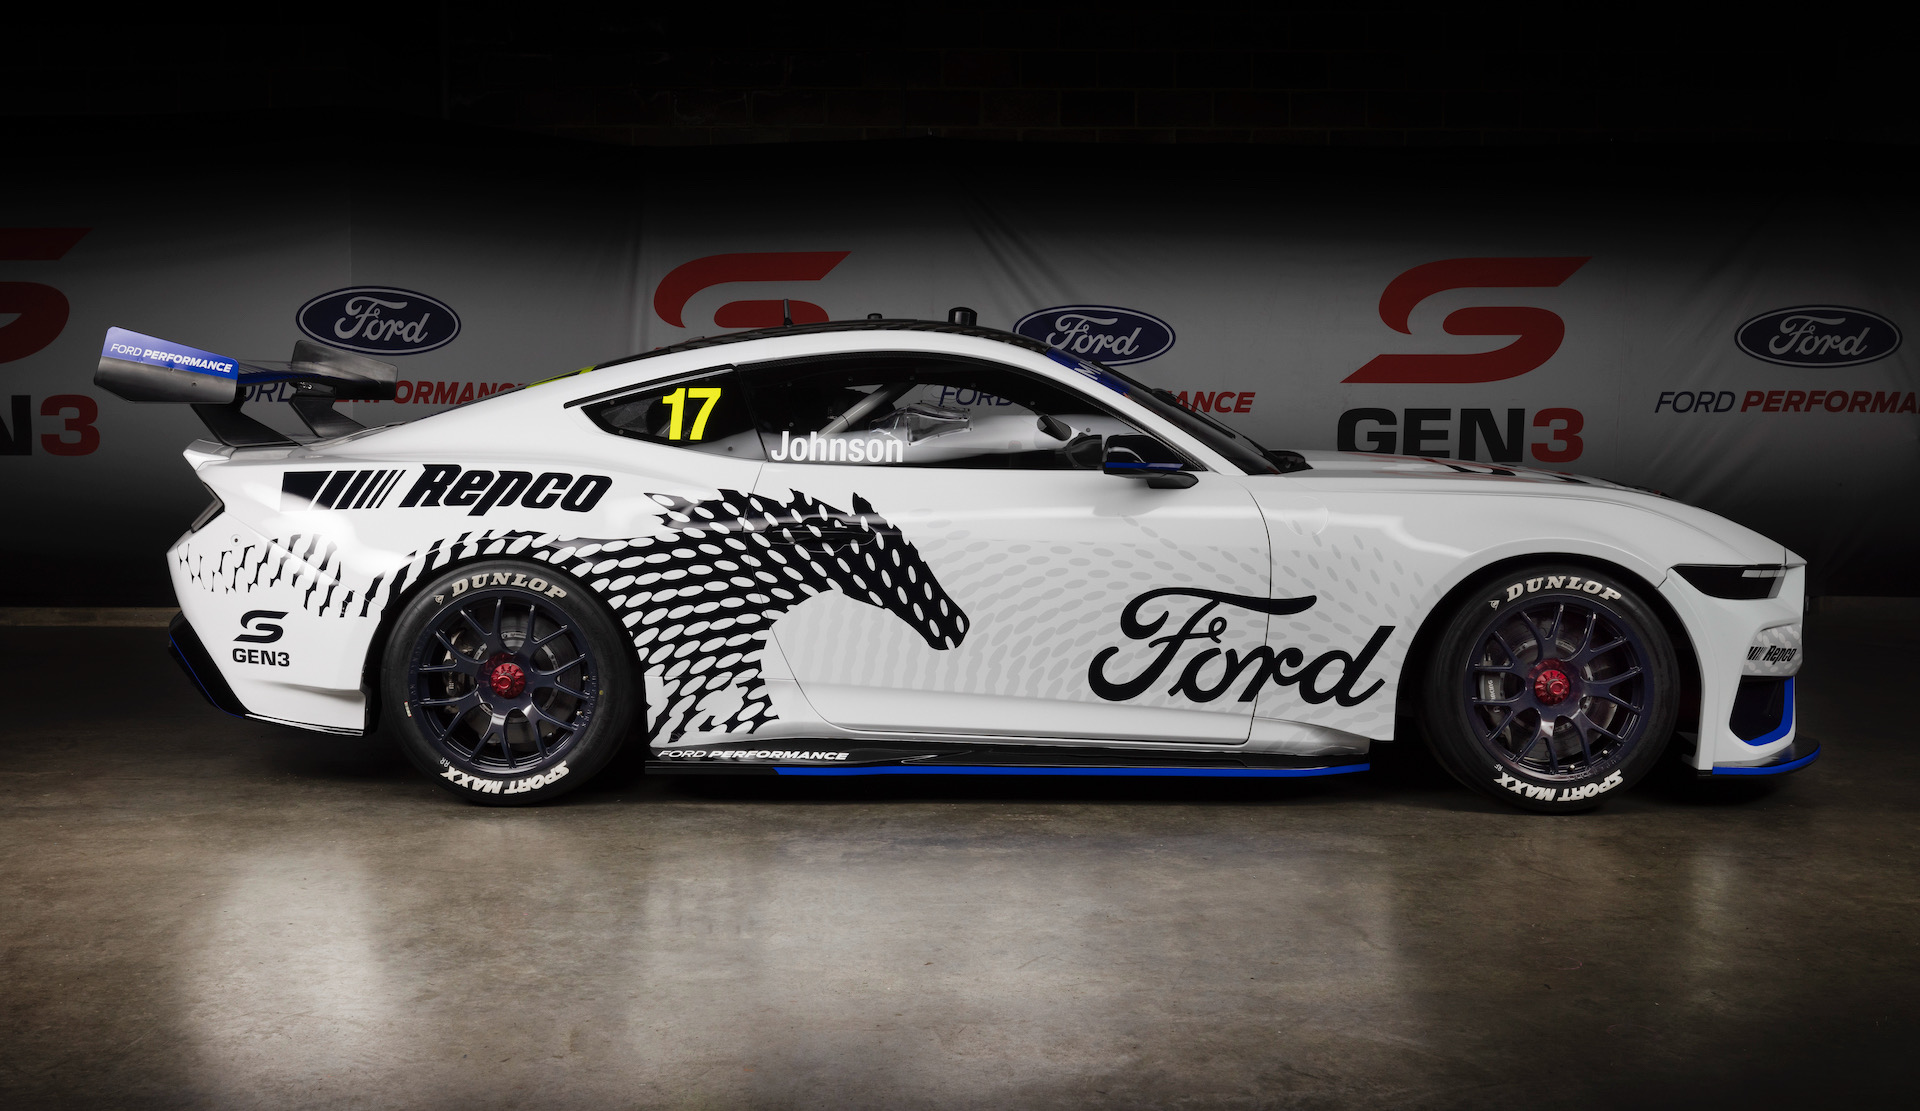 2023 Ford Mustang Gt Supercars Gen3 Race Car Revealed At Bathurst